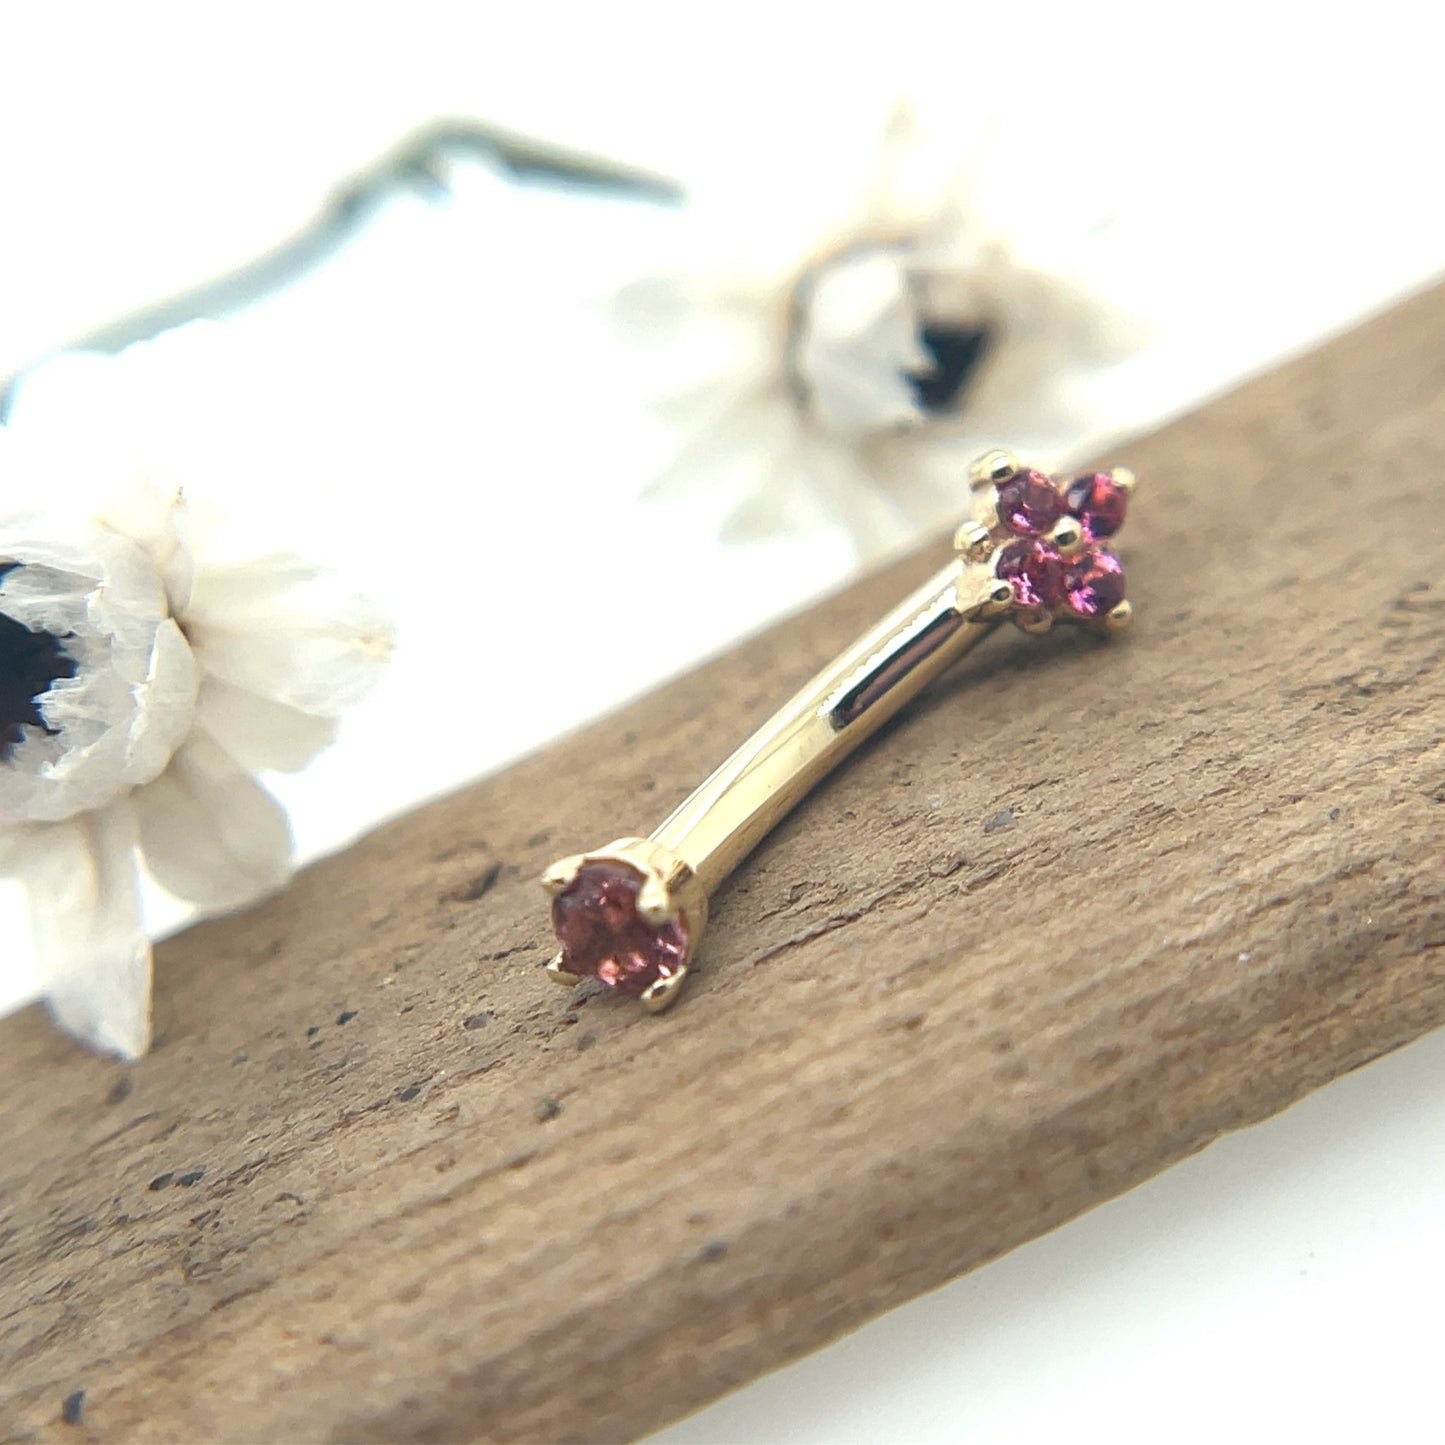 3.5mm Reema Navel Curve - Agave in Bloom